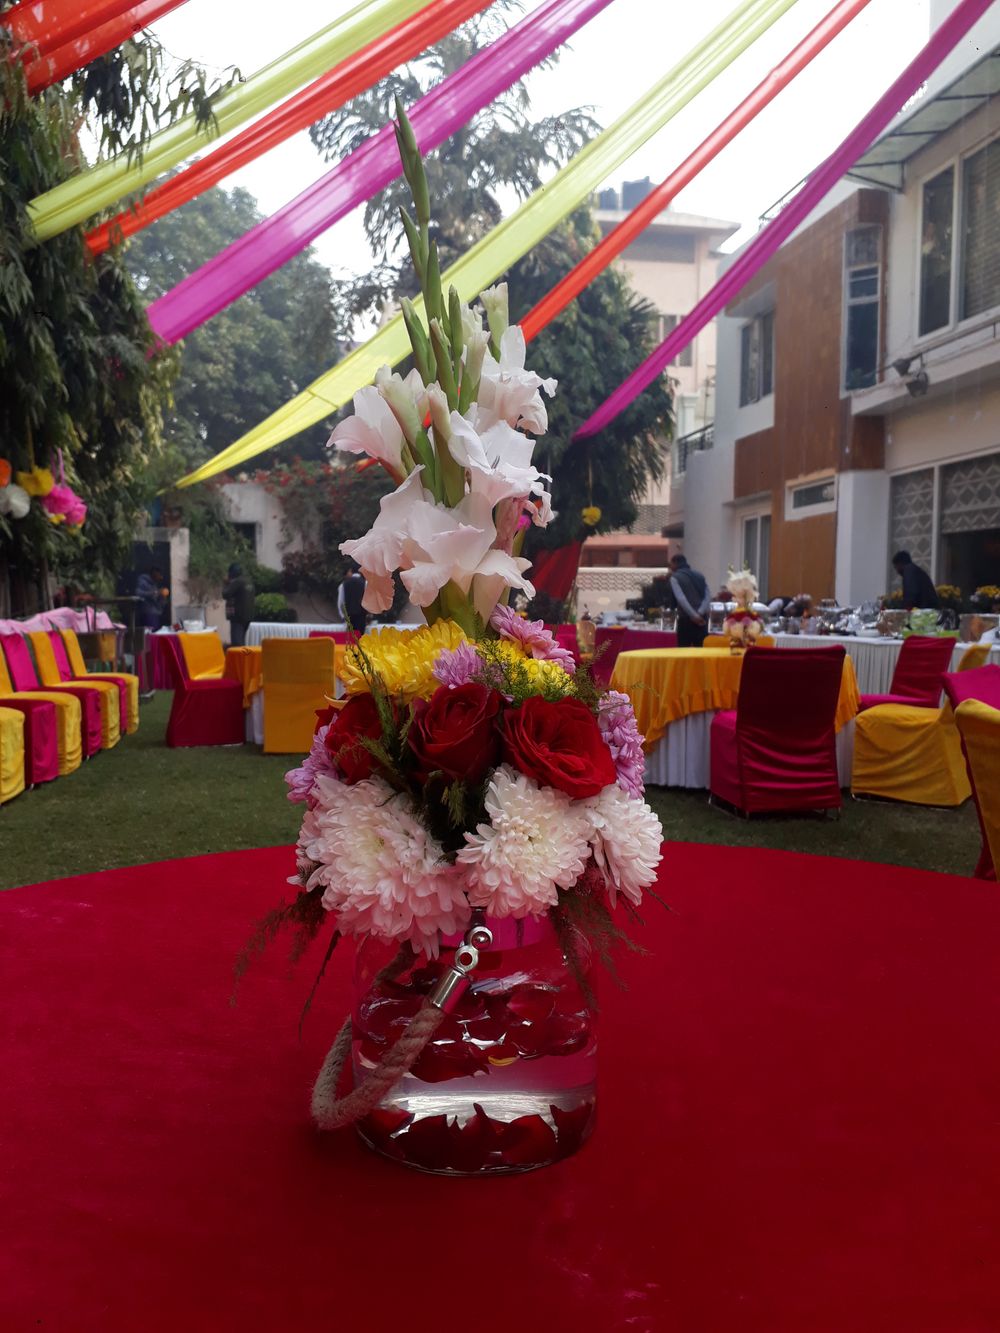 Photo From Groom Mehendi - By Party Solutions Rekha